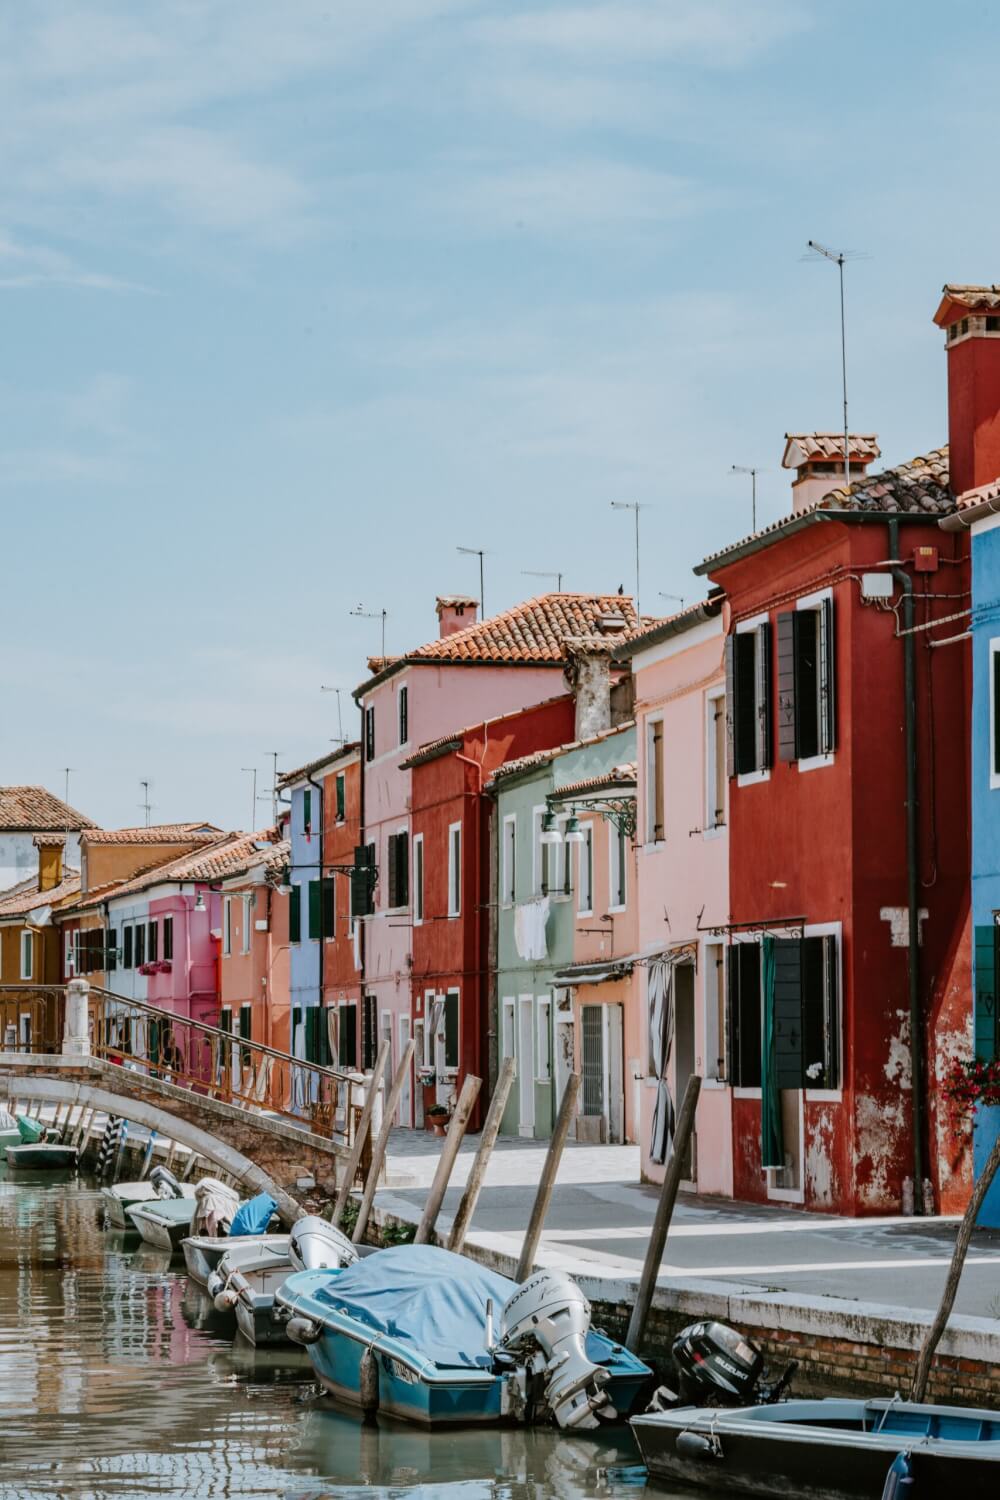 Colourful houses along a canal and bridge in Burano, Italy